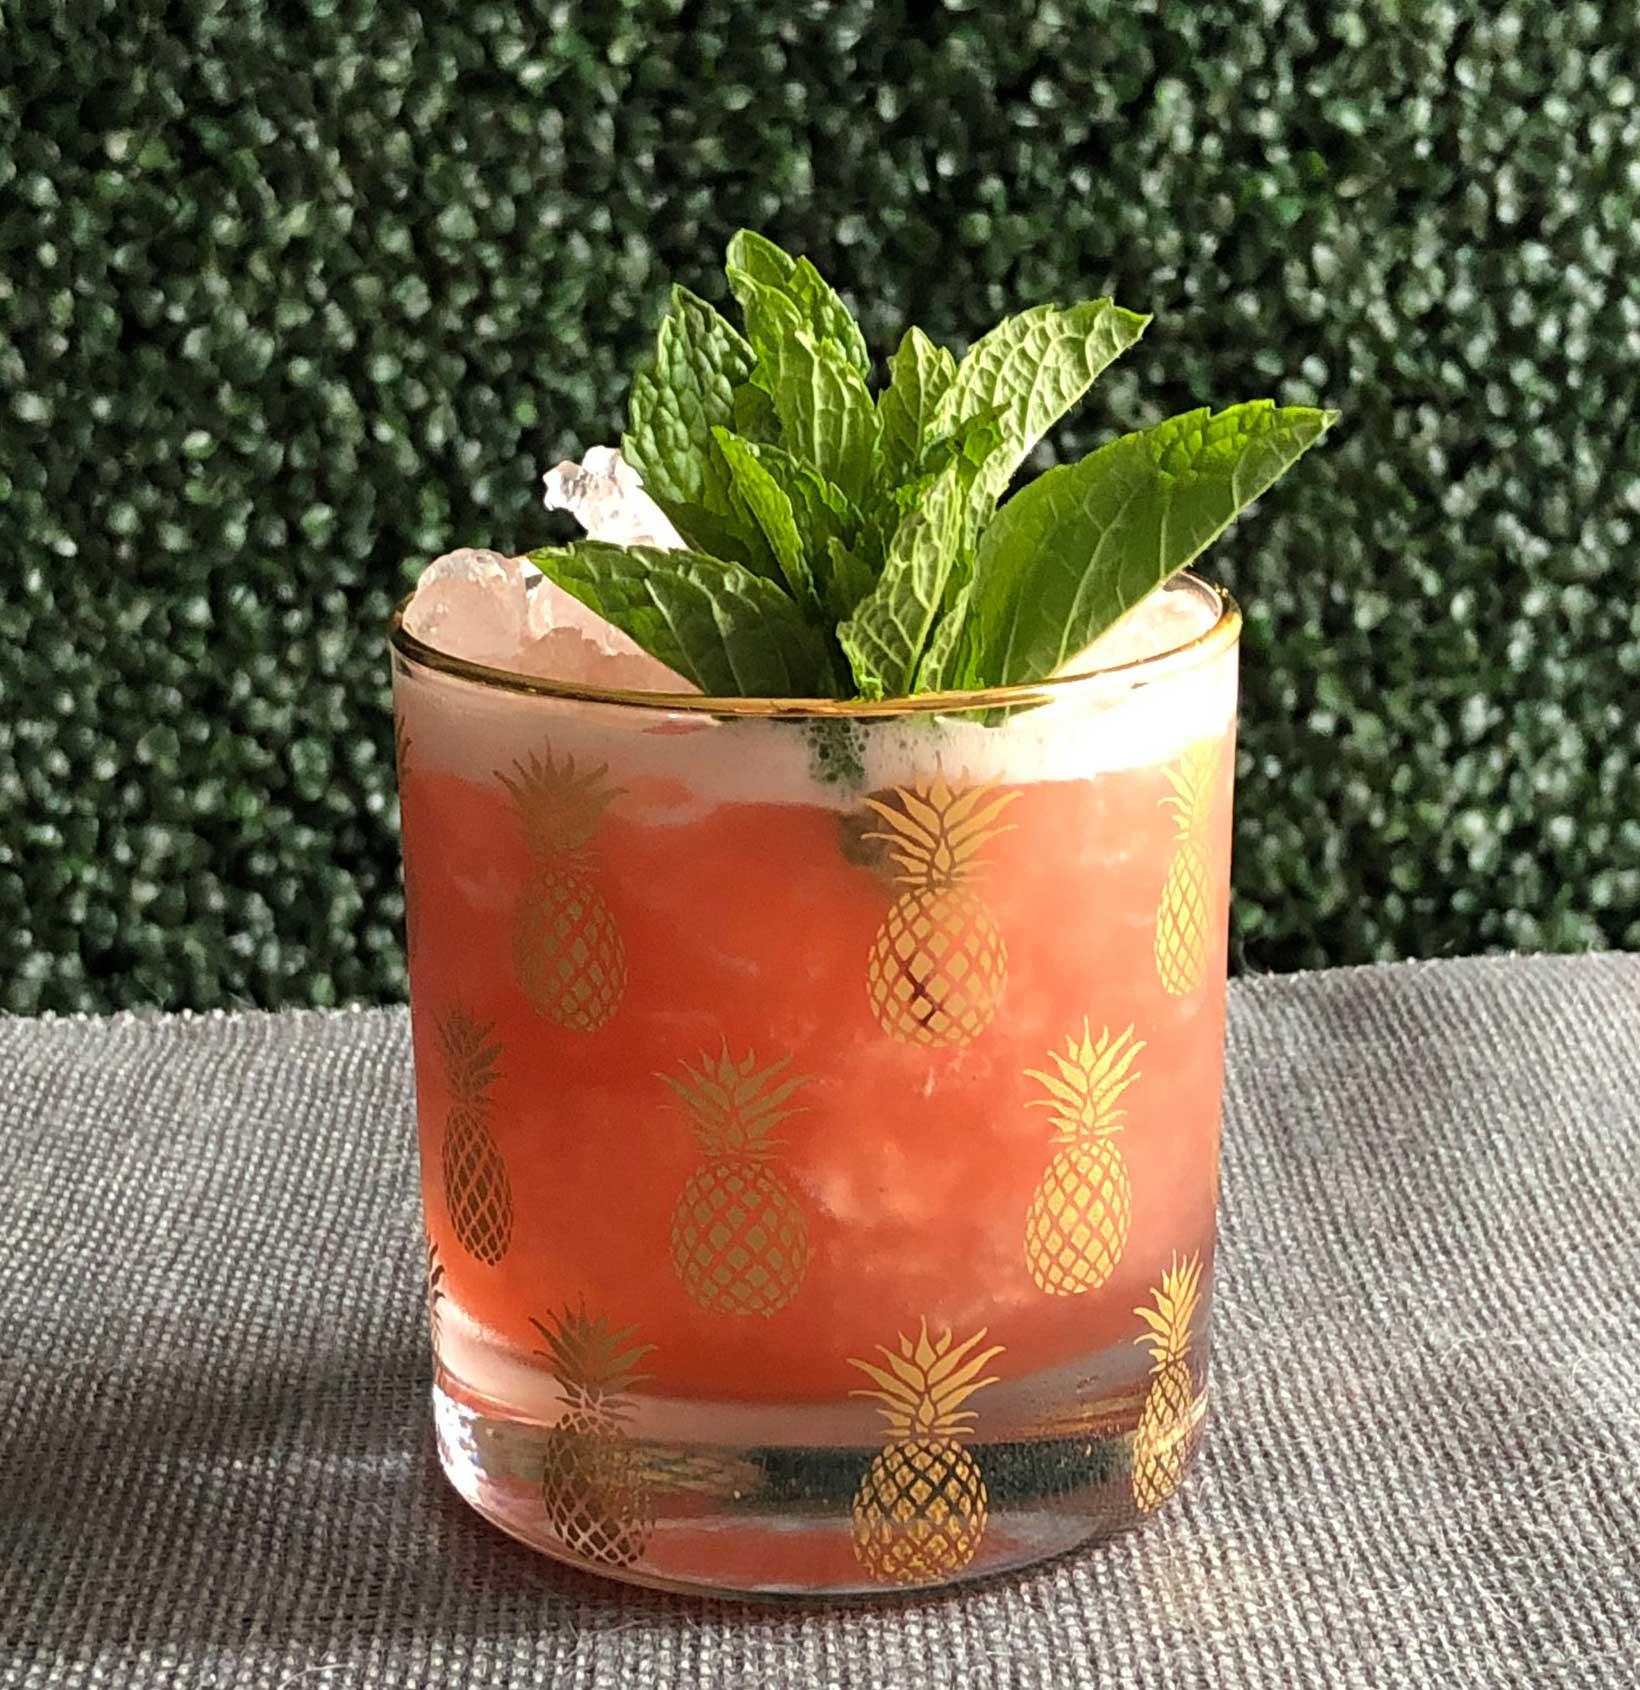 An example of the Jungle Boogie, the mixed drink (drink), by Cali Gold, Beretta, San Francisco, featuring Zirbenz Stone Pine Liqueur of the Alps, lime juice, grapefruit juice, cinnamon-infused sugar syrup, crushed ice, and sprig of mint; photo by Lee Edwards